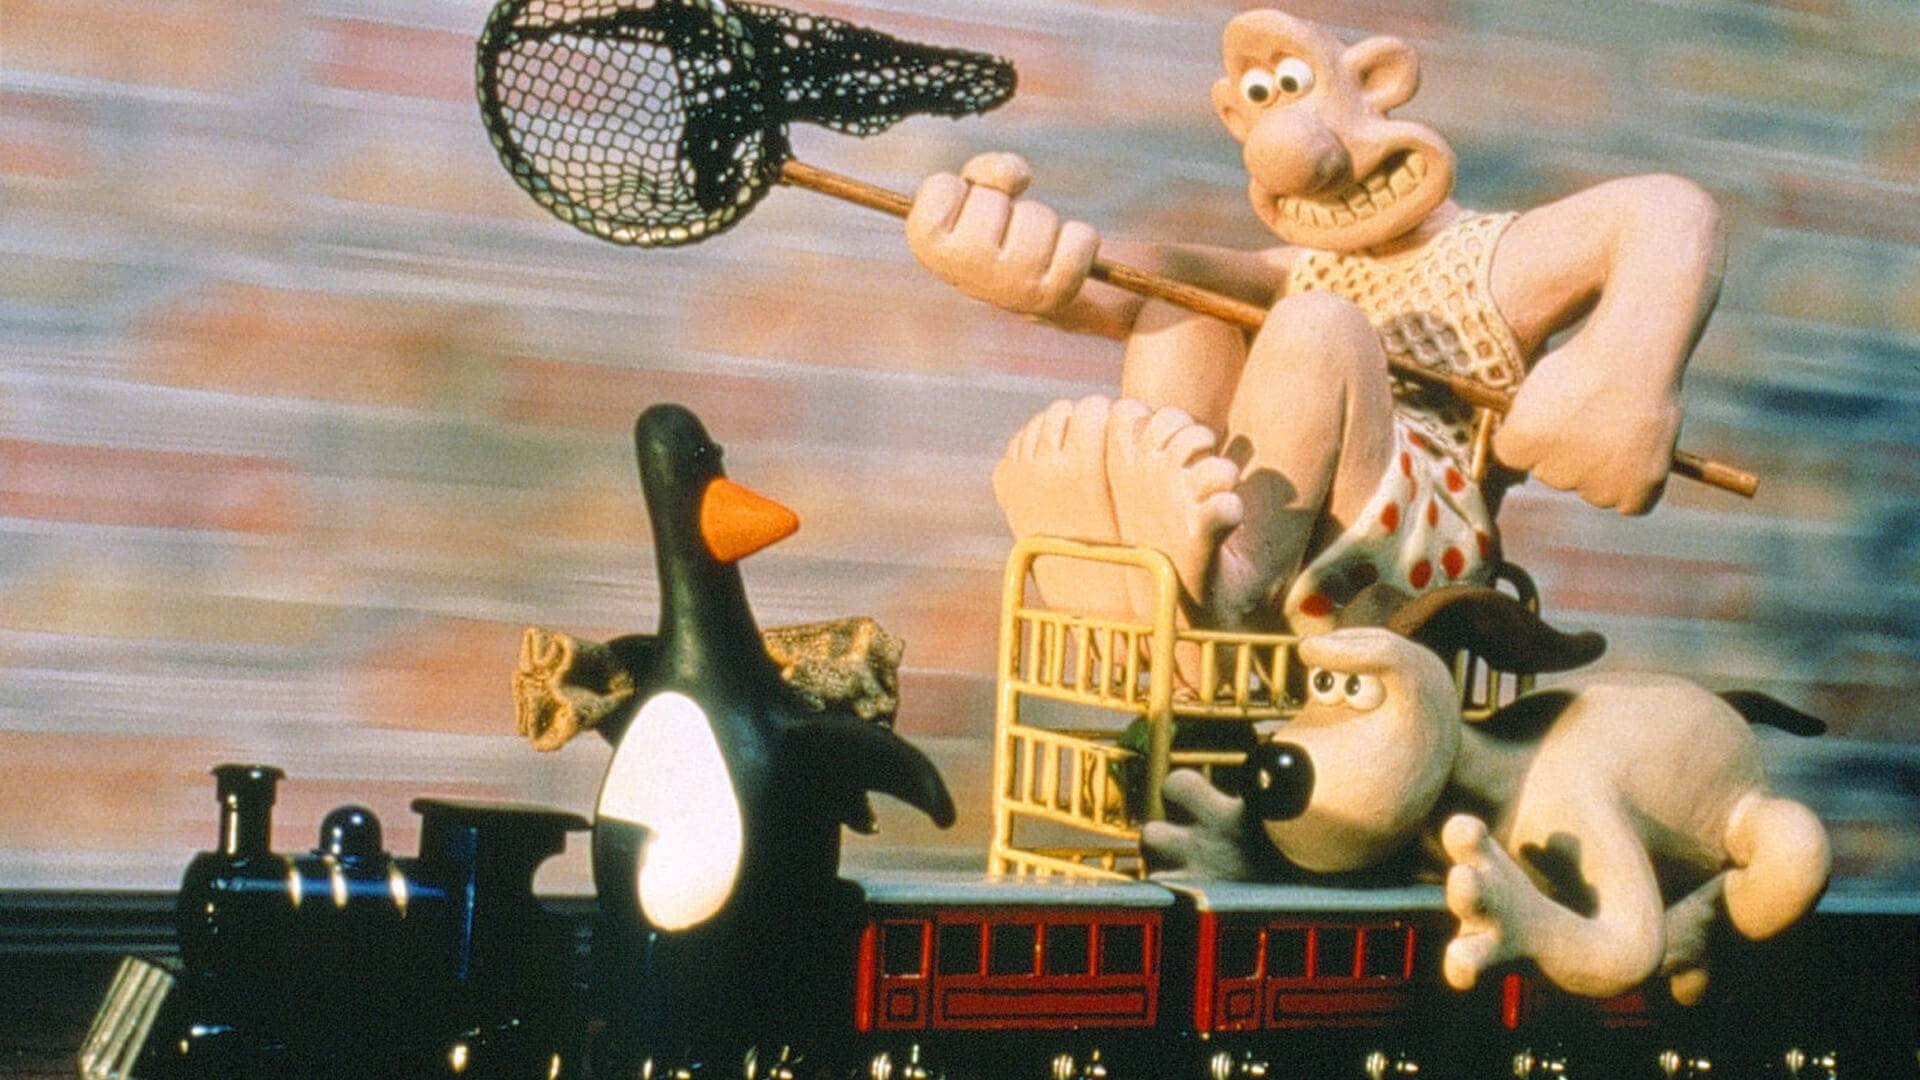 Wallace & Gromit, Wrong trousers, Skwigly Magazine, 1920x1080 Full HD Desktop